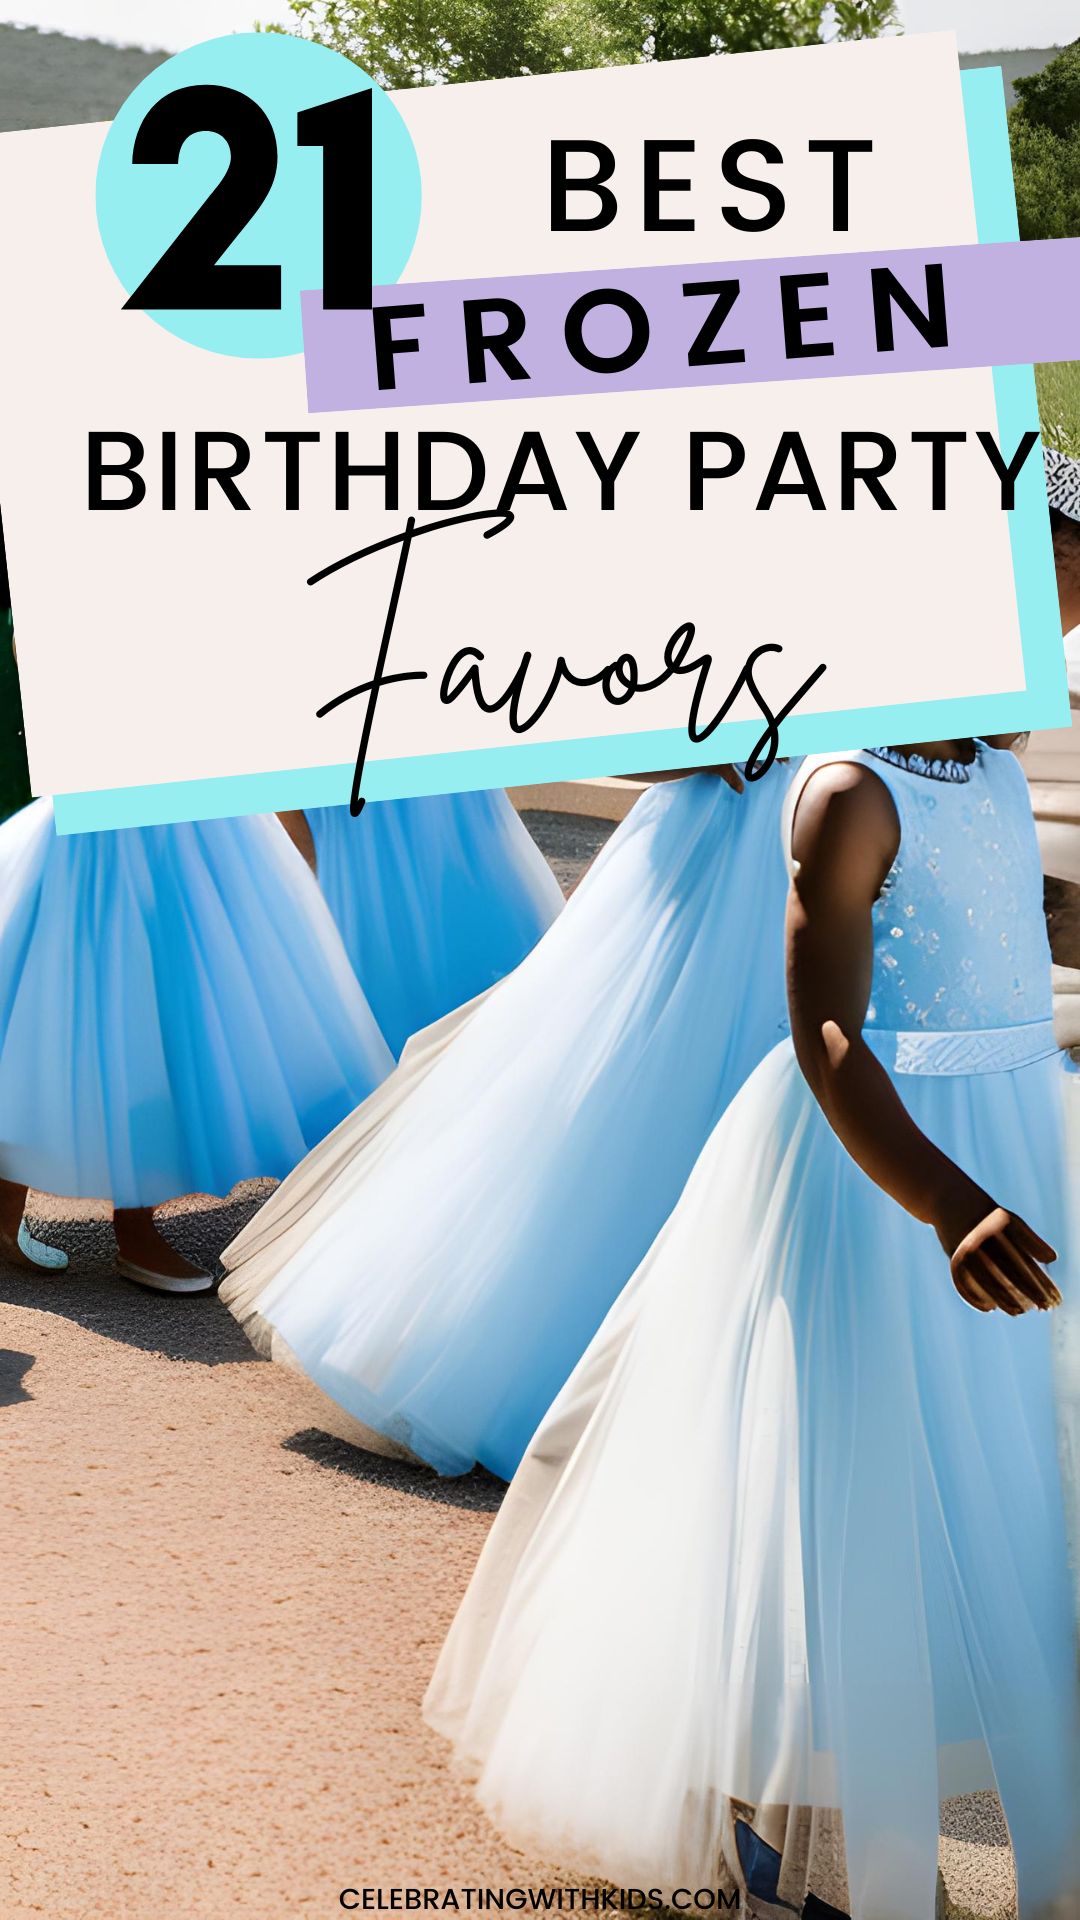 21 Best Frozen Party Favors for birthday parties - Celebrating with kids